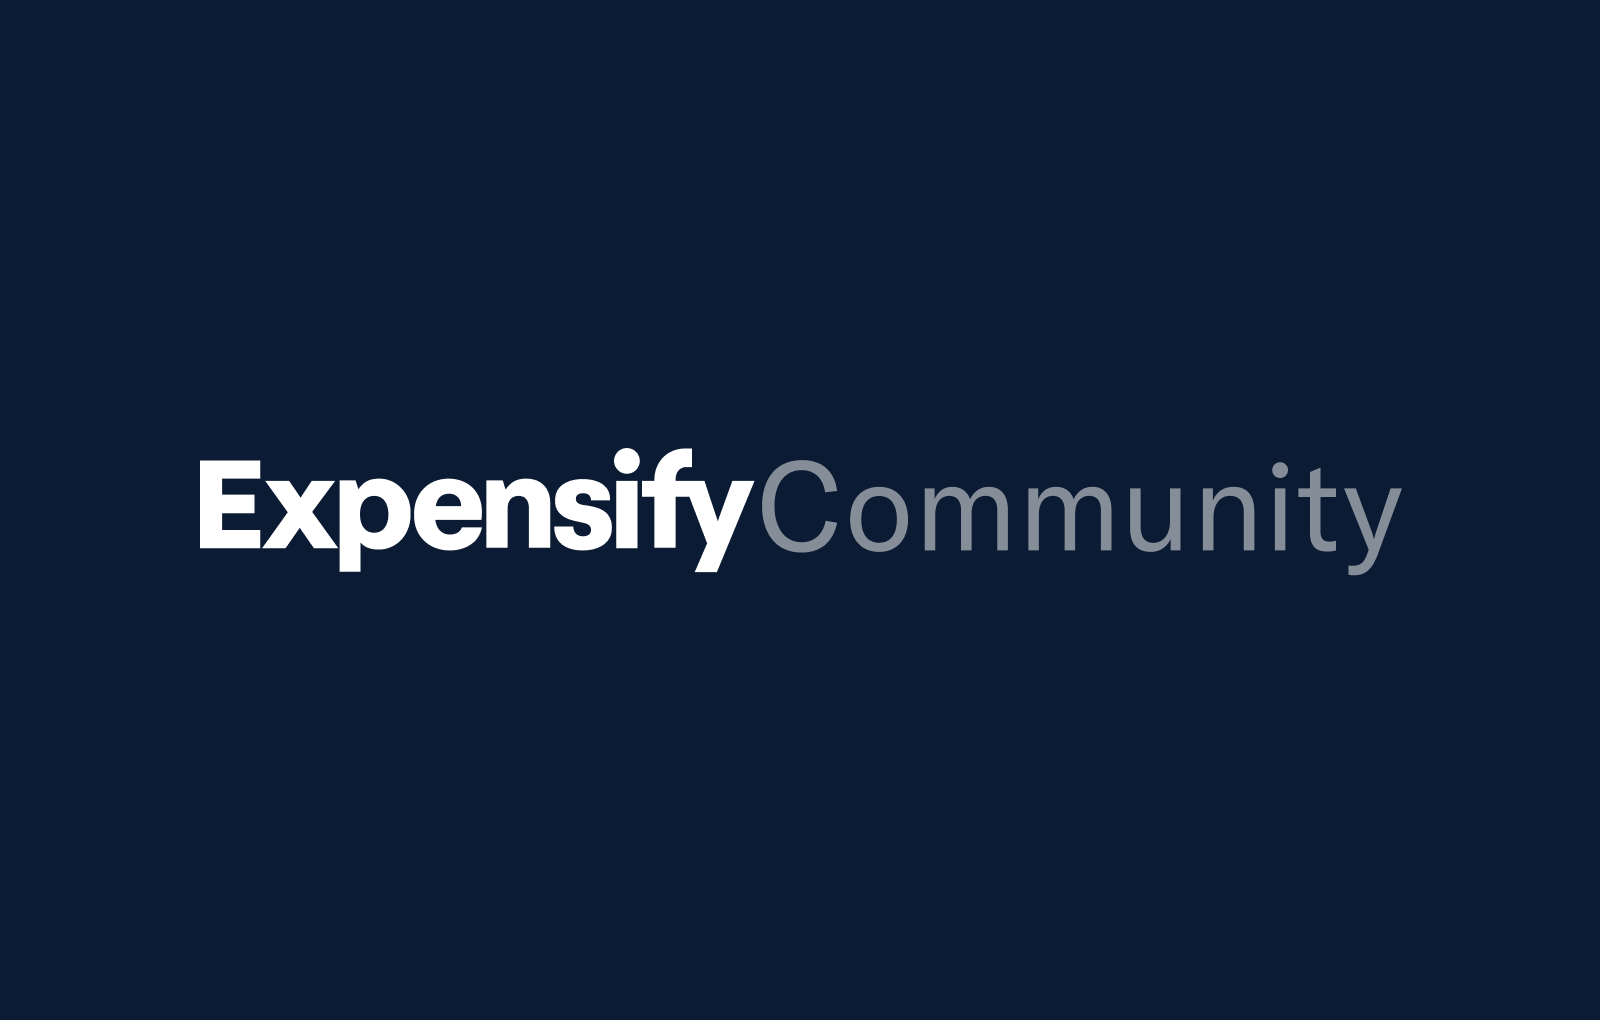 [Help®~Aa™] How do I speak to American customer service?!!!HeLpDe$k 24*7((LiVe PeR$oN)) — Important Notice: After July 31, 2024, the Expensify community will not longer be available. Help docs and resources can be found on help.expensify.com and you can message Concierge with any additional questions.